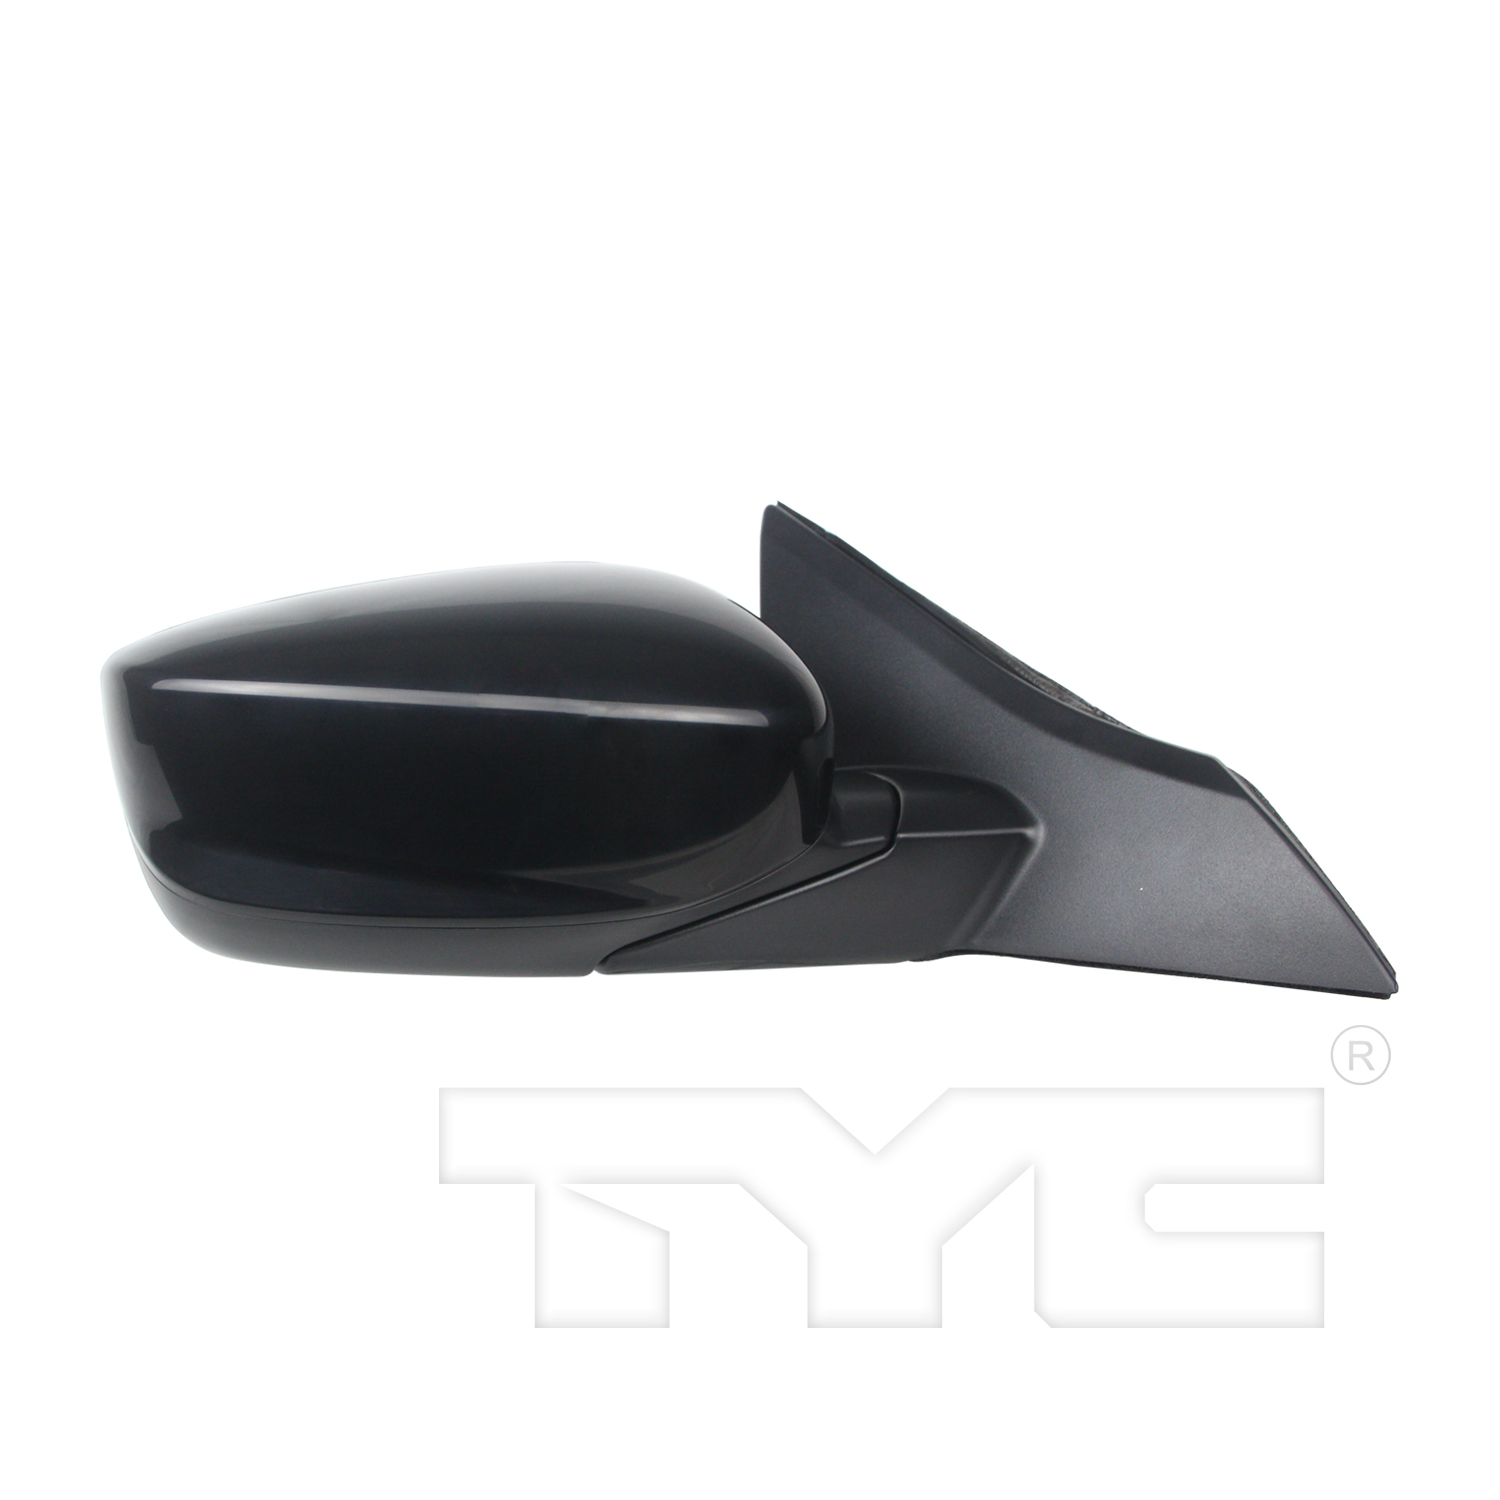 Aftermarket MIRRORS for HONDA - ACCORD, ACCORD,13-17,RT Mirror outside rear view